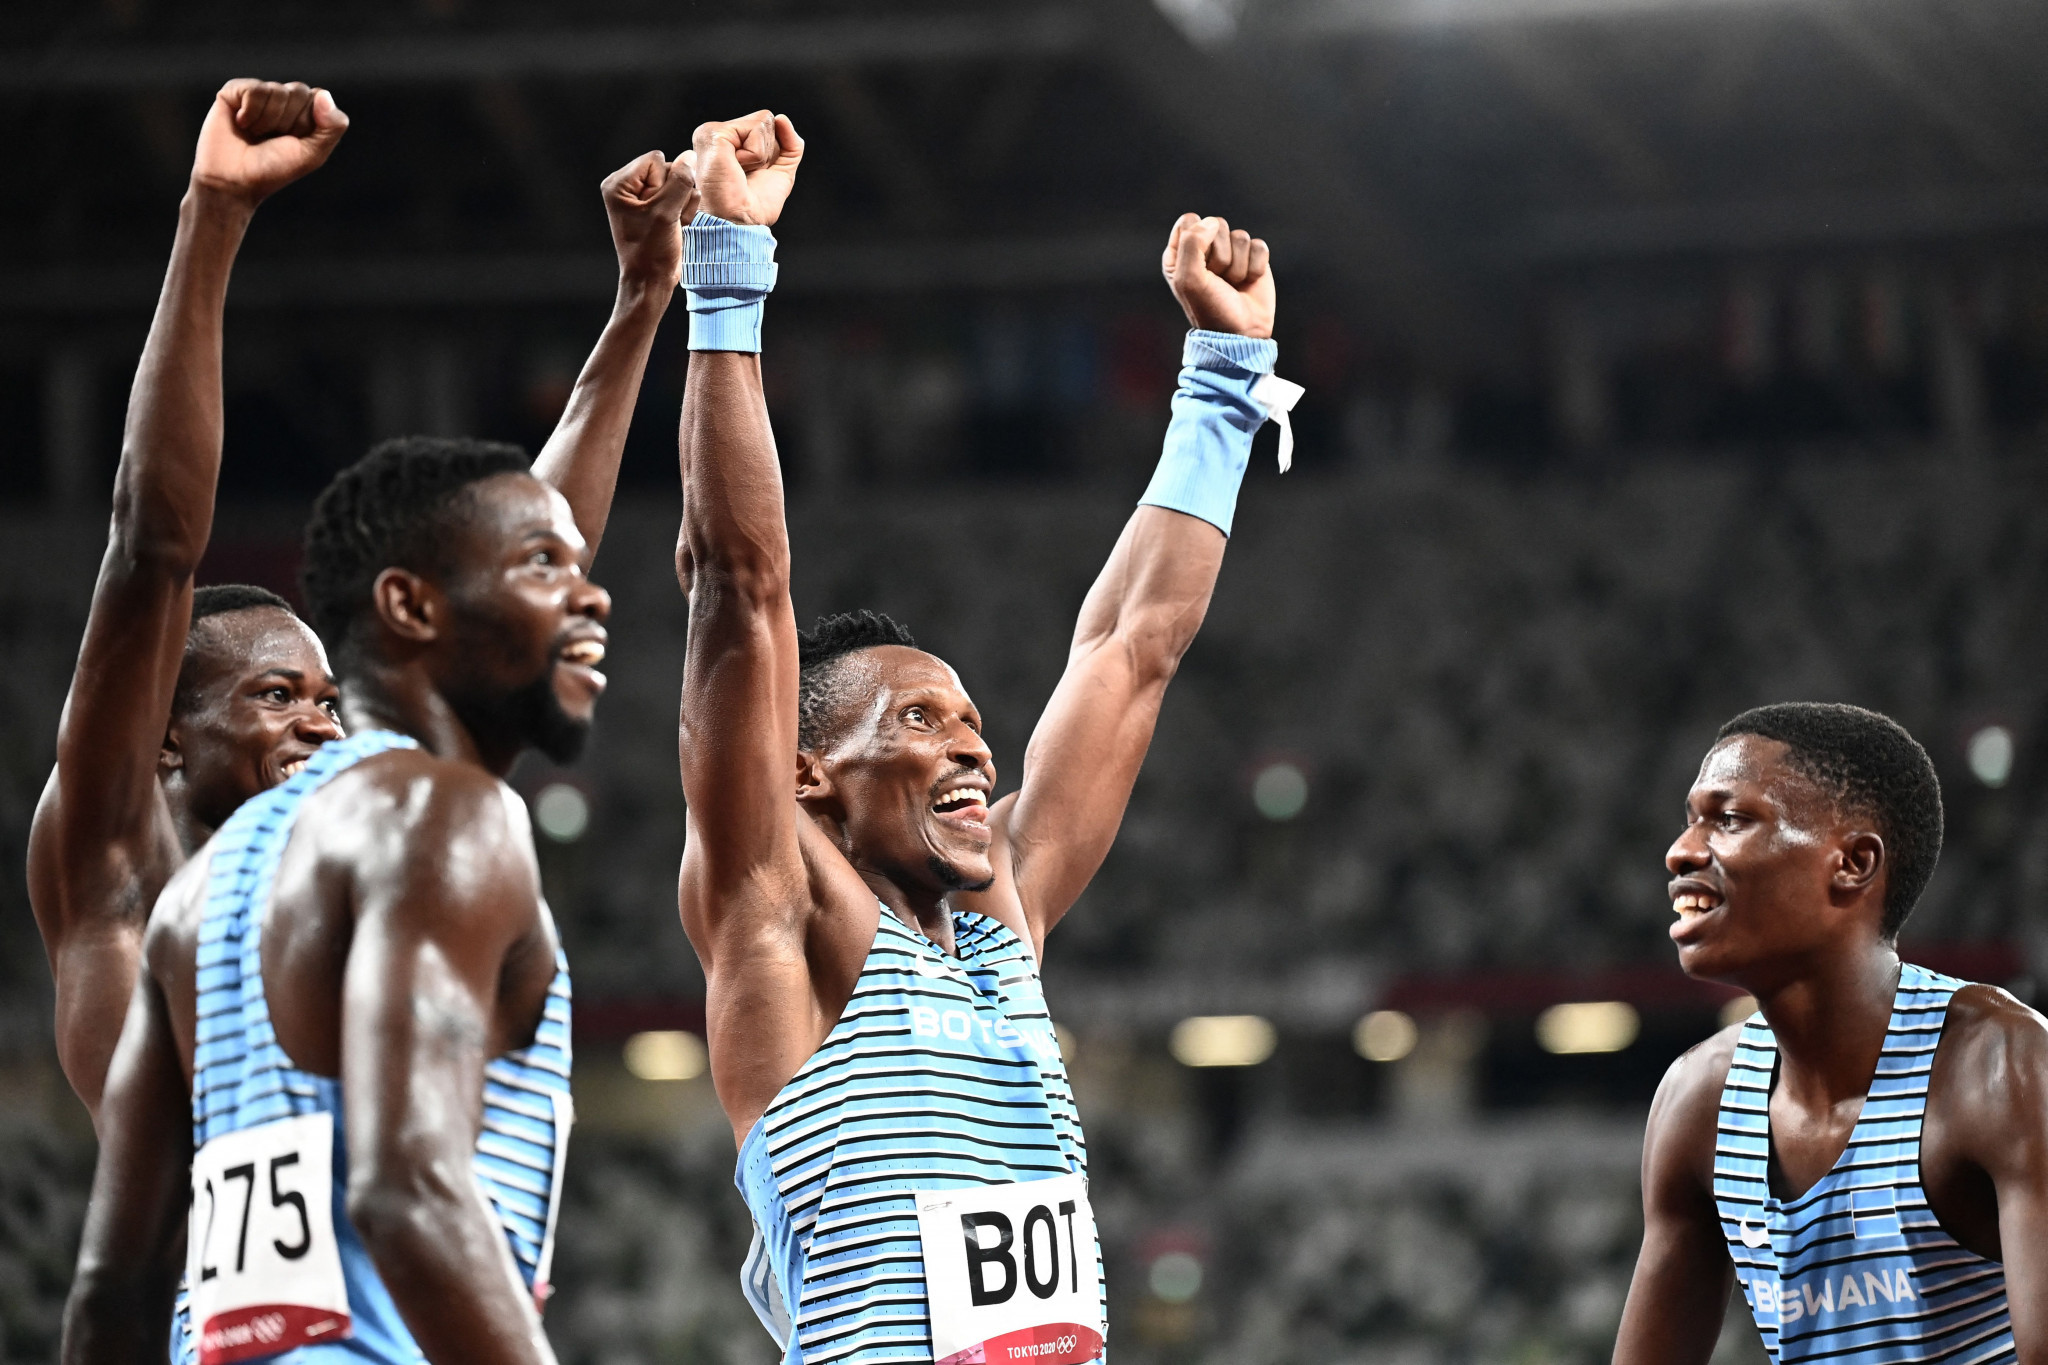 Botswana won one medal at the Tokyo 2020 Olympics, in the men's 4x400m relay ©Getty Images
